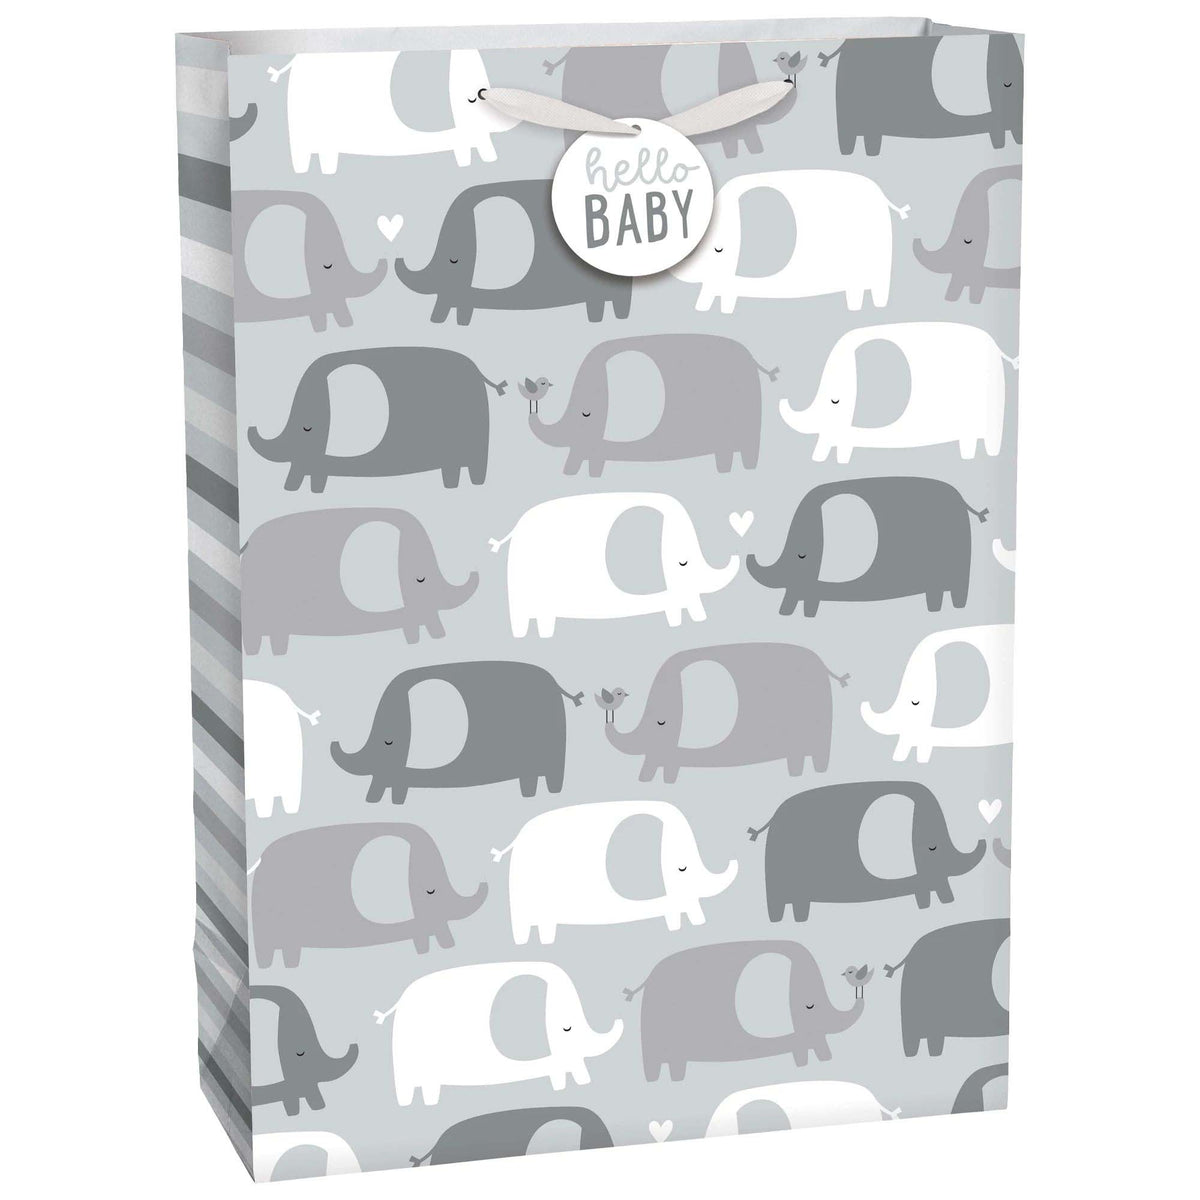 AMSCAN CA Baby Shower Gender Neutral Elephants Extra Large Gift Bag, 17 x 12.5 x 6 Inches, 1 Count